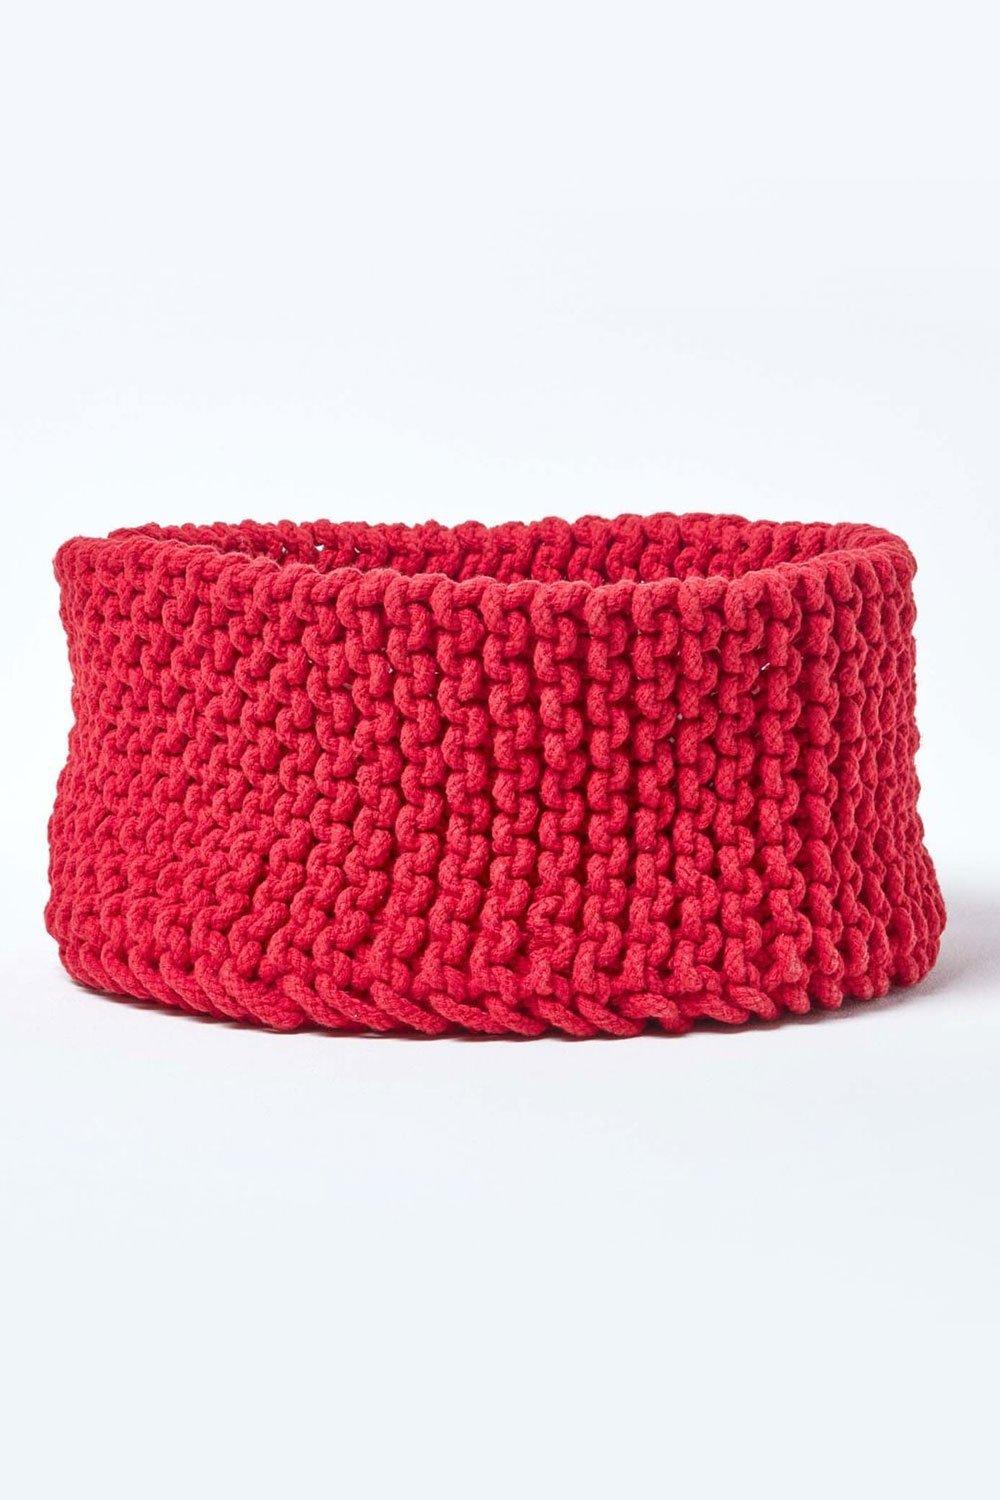 Homescapes Cotton Knitted Round Storage Basket, 37 x 21 cm|red